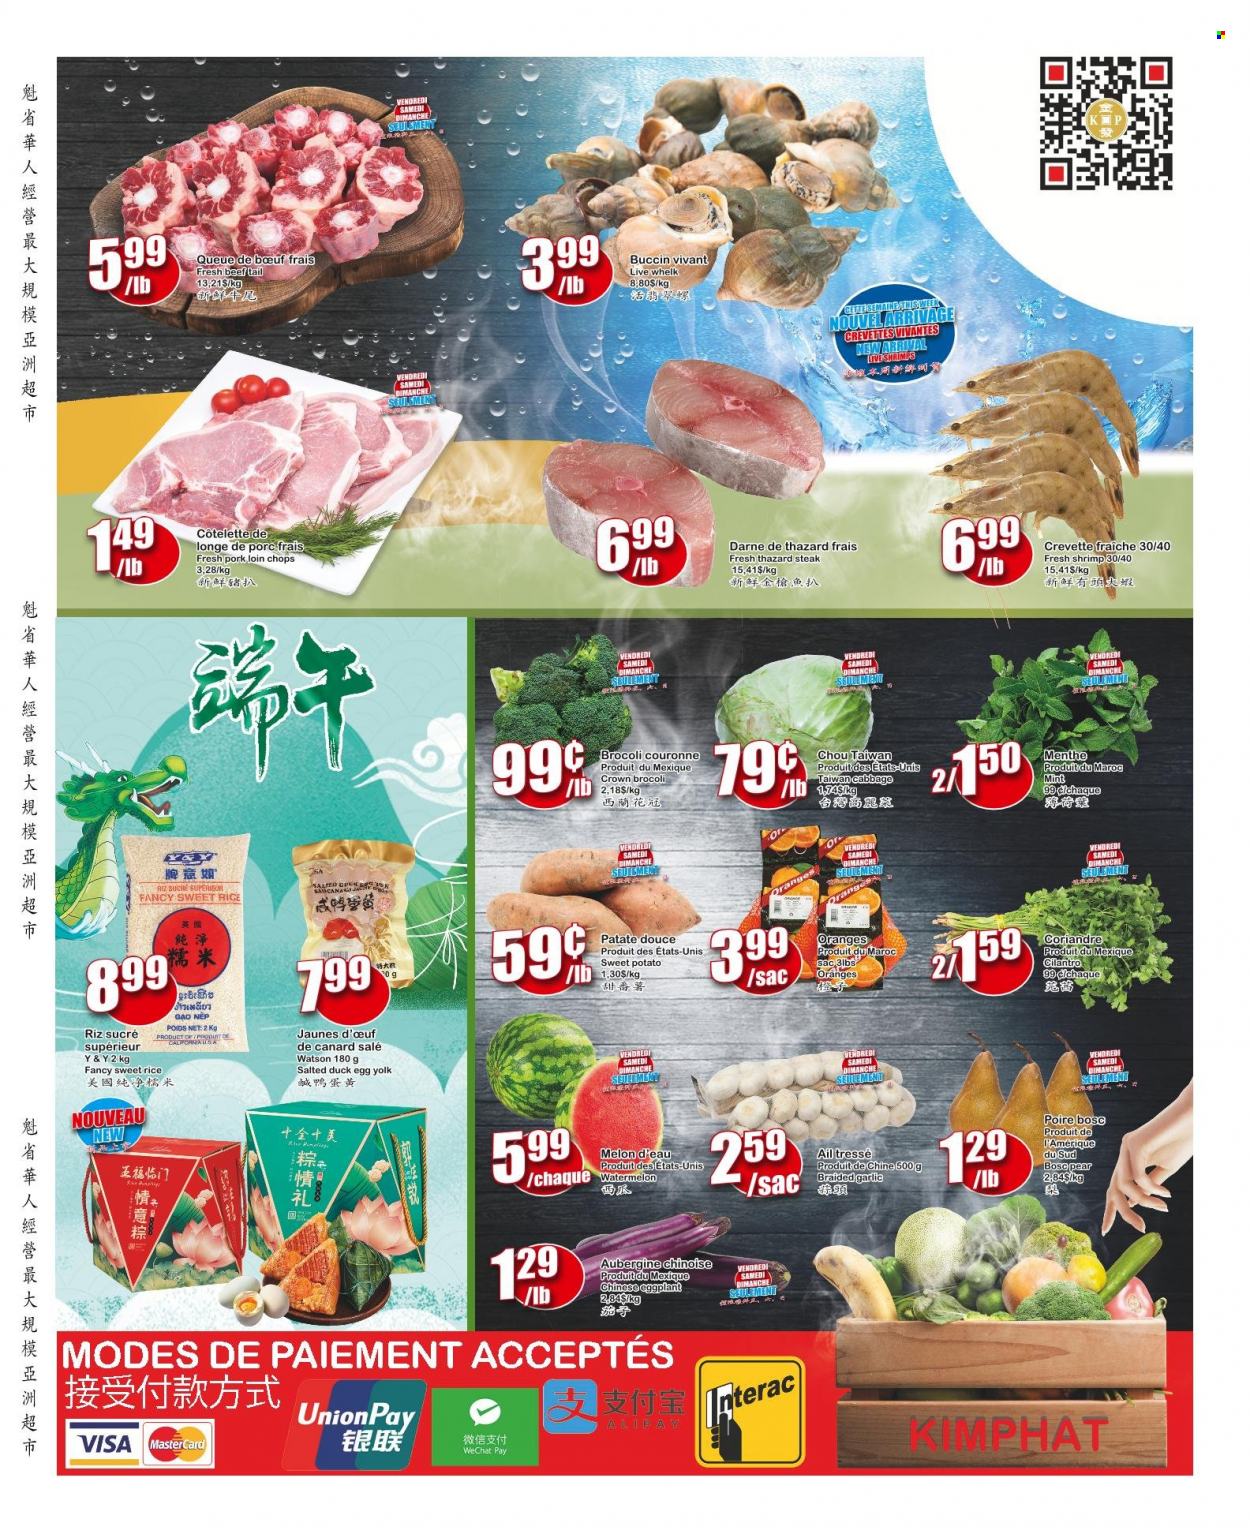 thumbnail - Kim Phat Flyer - May 19, 2022 - May 25, 2022 - Sales products - cabbage, garlic, sweet potato, eggplant, watermelon, pears, melons, shrimps, eggs, rice, cilantro, L'Or, pork chops, pork loin, pork meat, steak, oranges. Page 3.